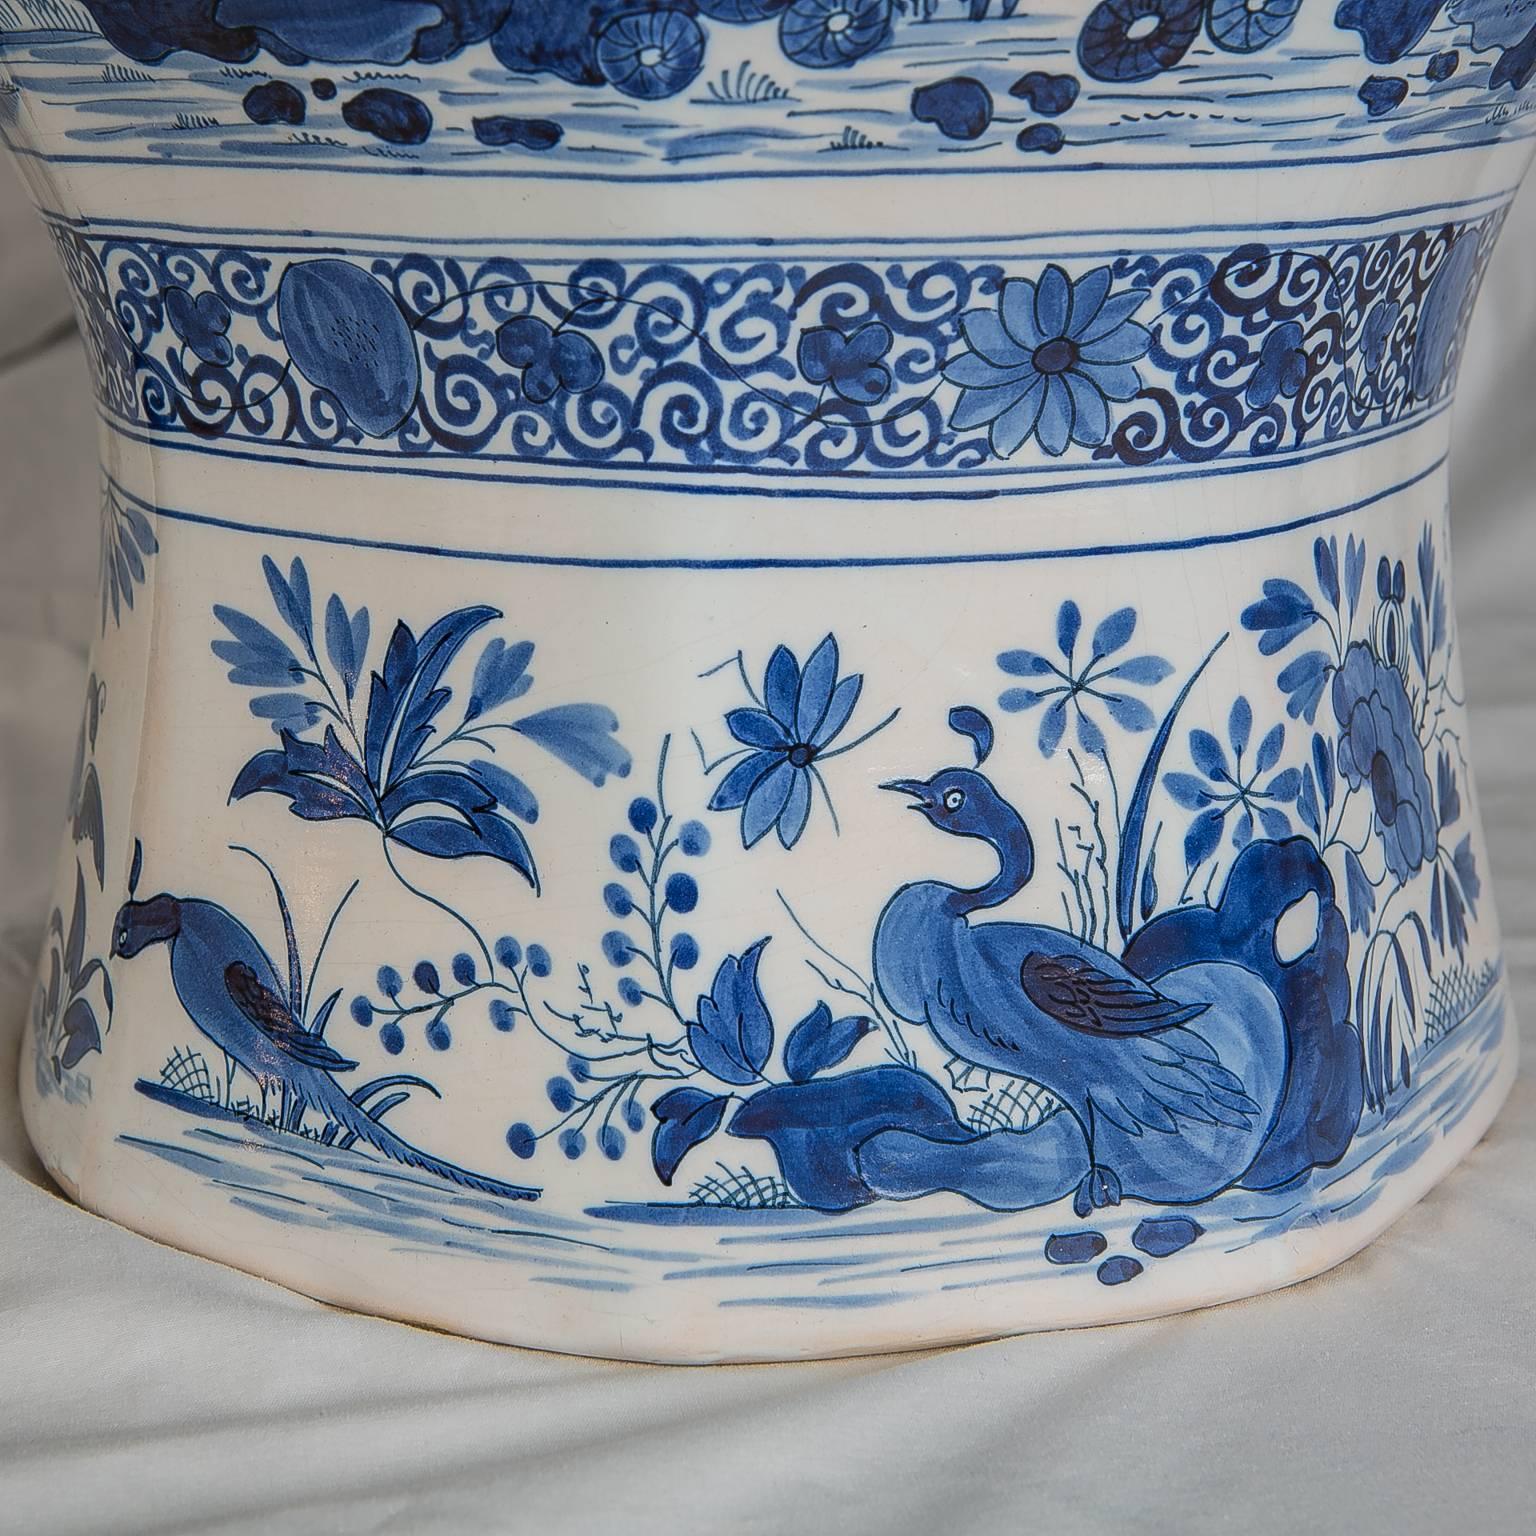 A pair of massive Dutch Delft octagonal, ginger jars painted in cobalt blue and white. Beautifully decorated with a continuous scene of a garden filled with flowers, songbirds and peacocks. The scenes show the exceptional and enduring charm of